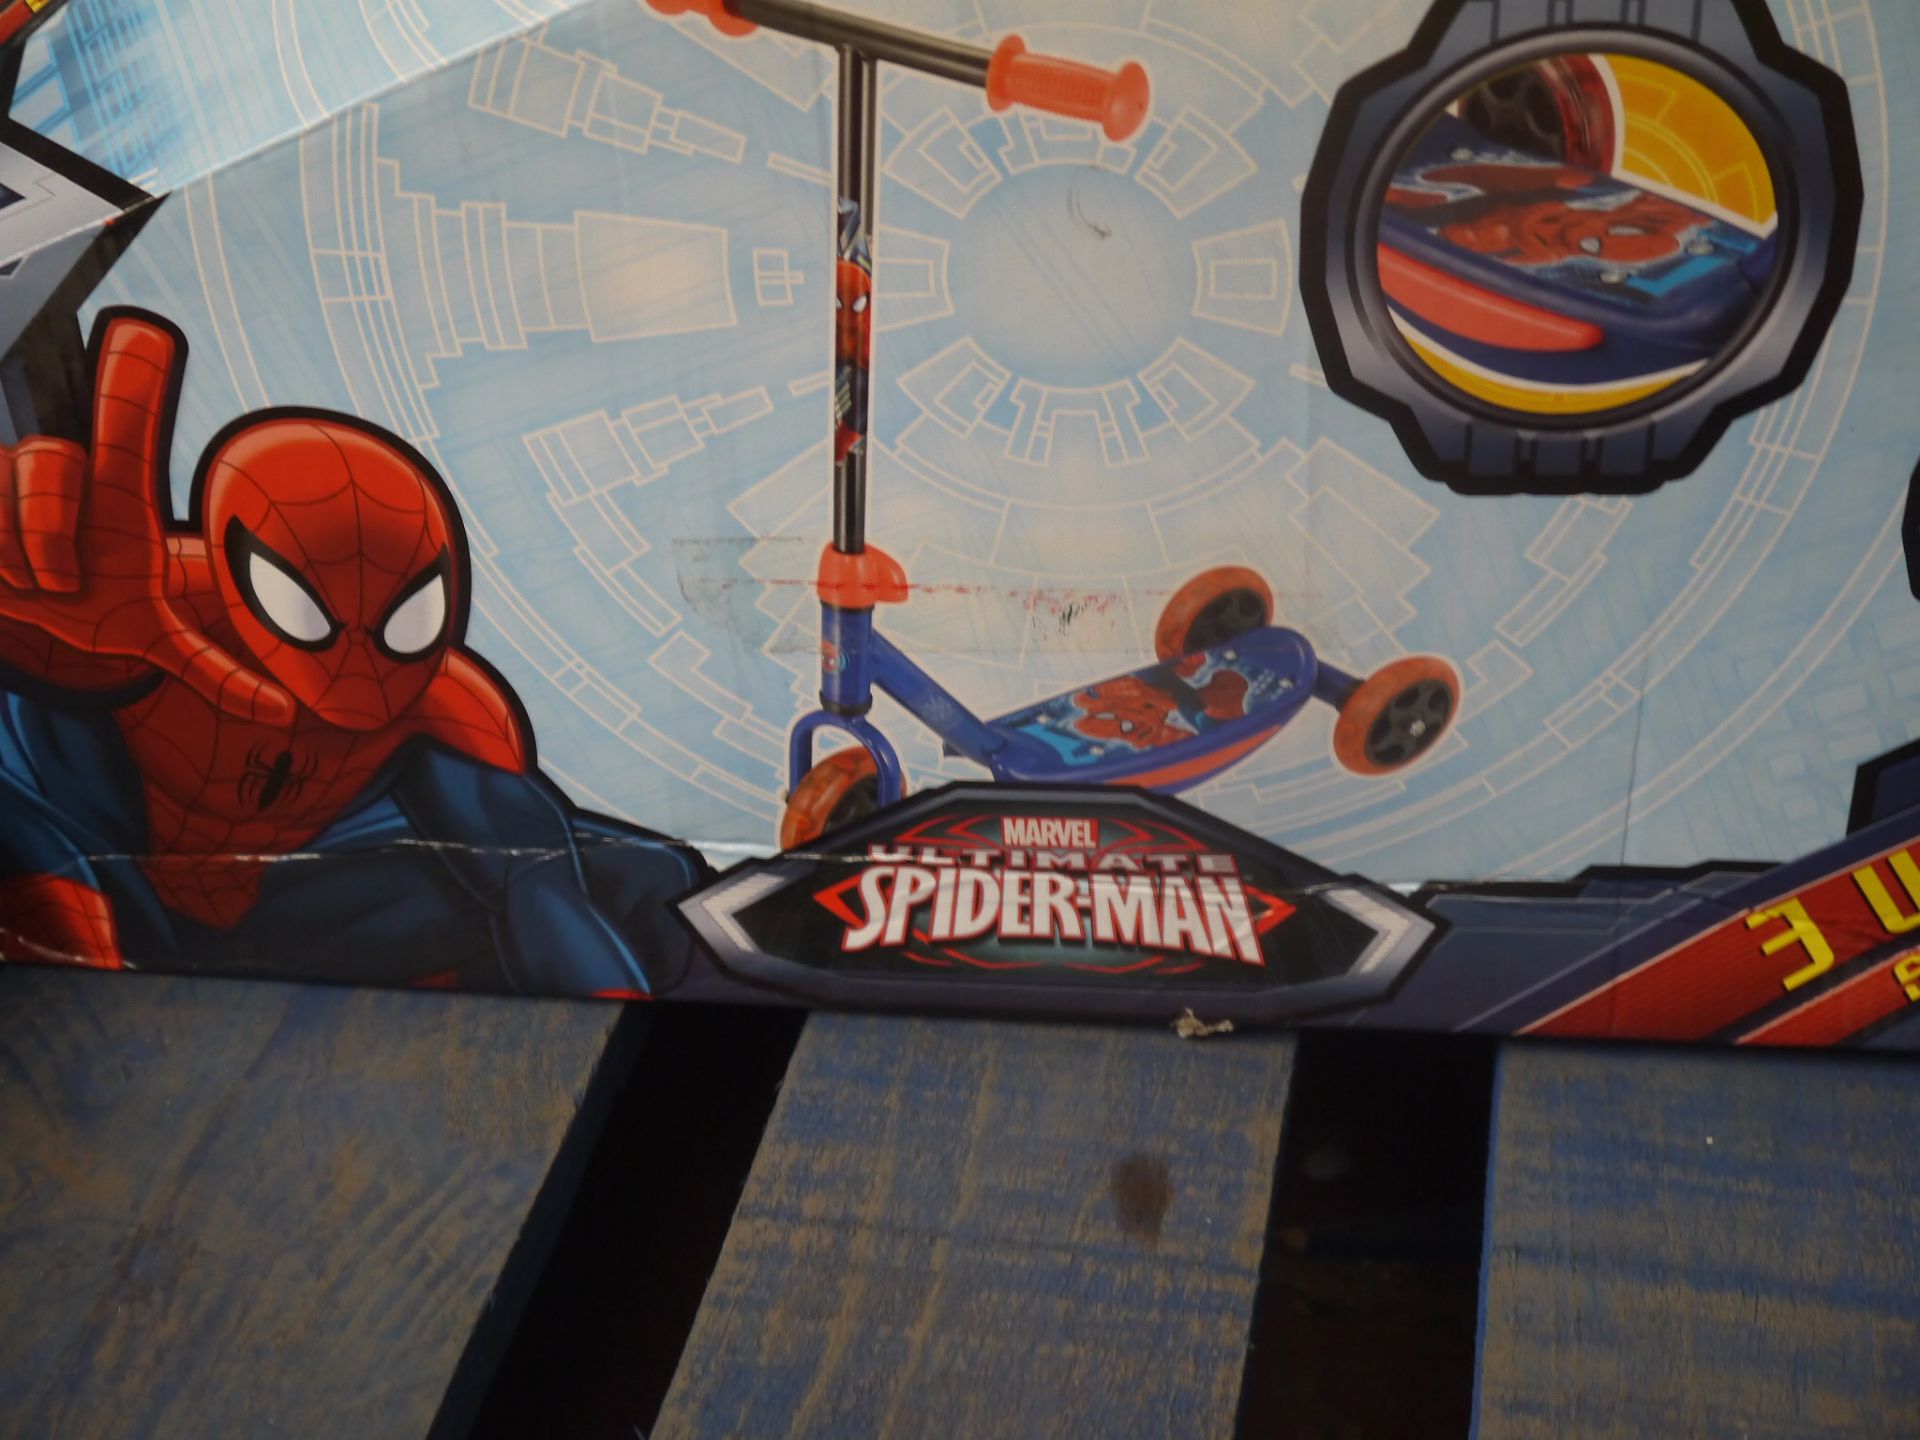 Spiderman 3 Wheel Scooter. Boxed.